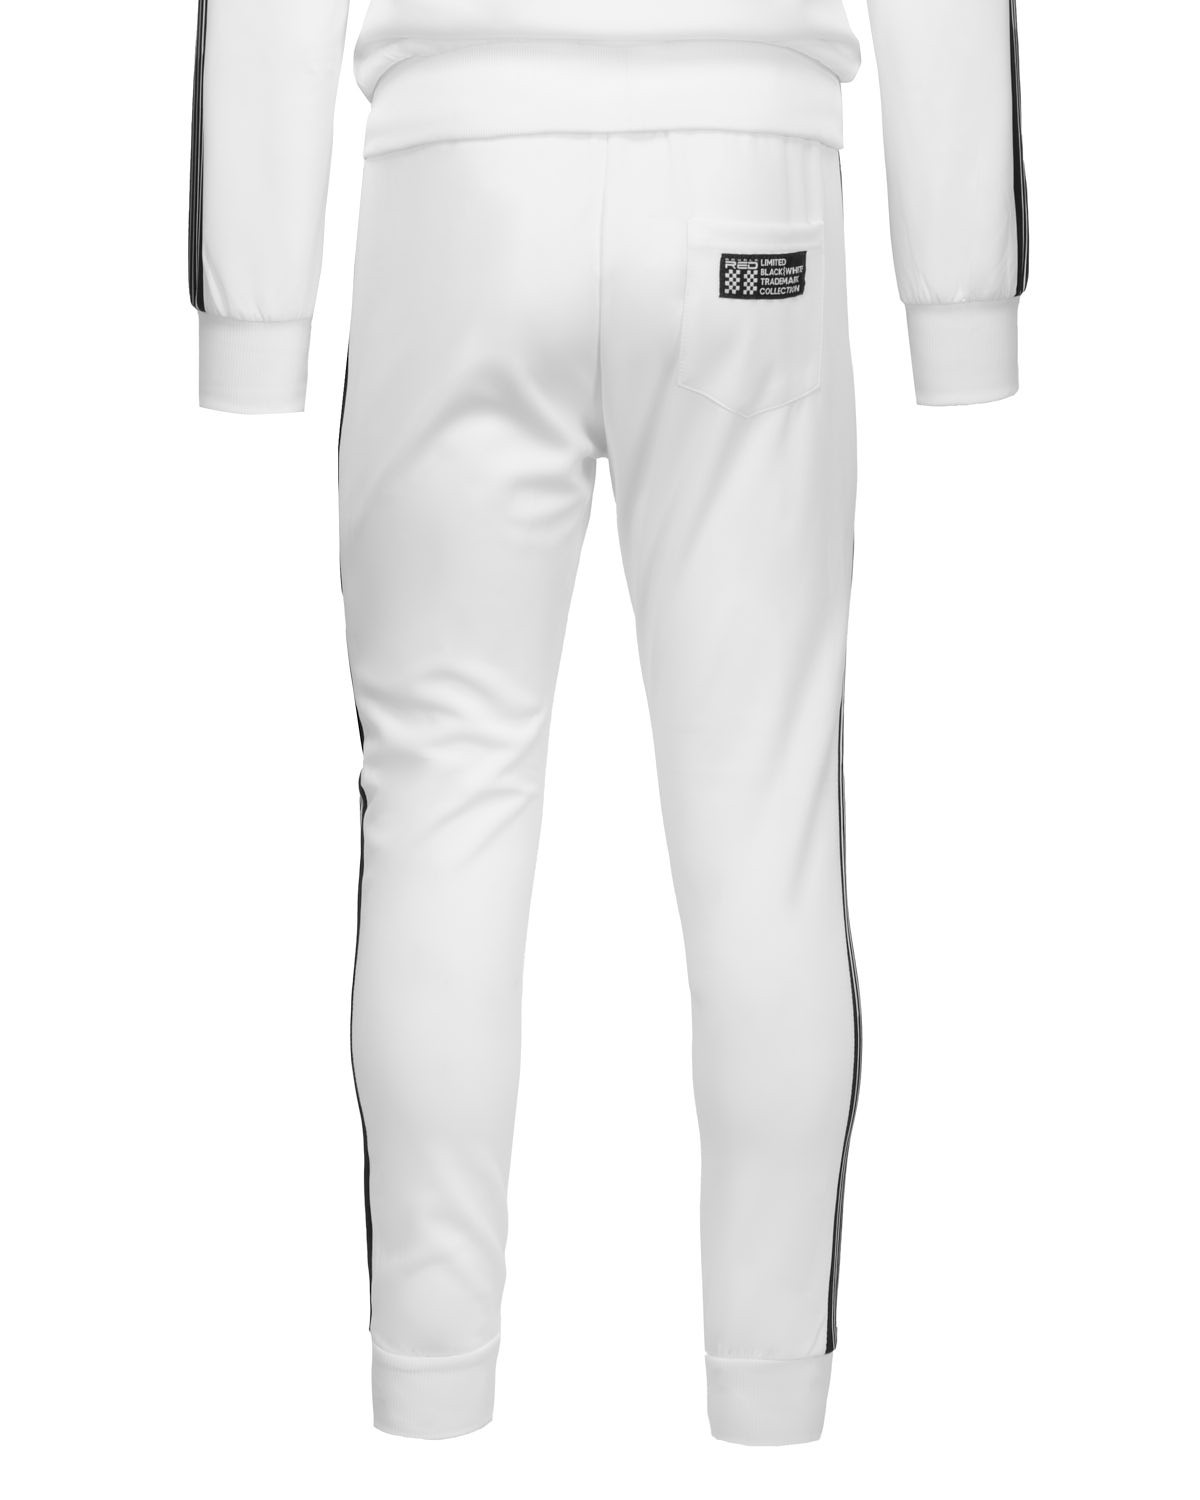 REFLEXERO SPORT IS YOUR GANG Tracksuit White